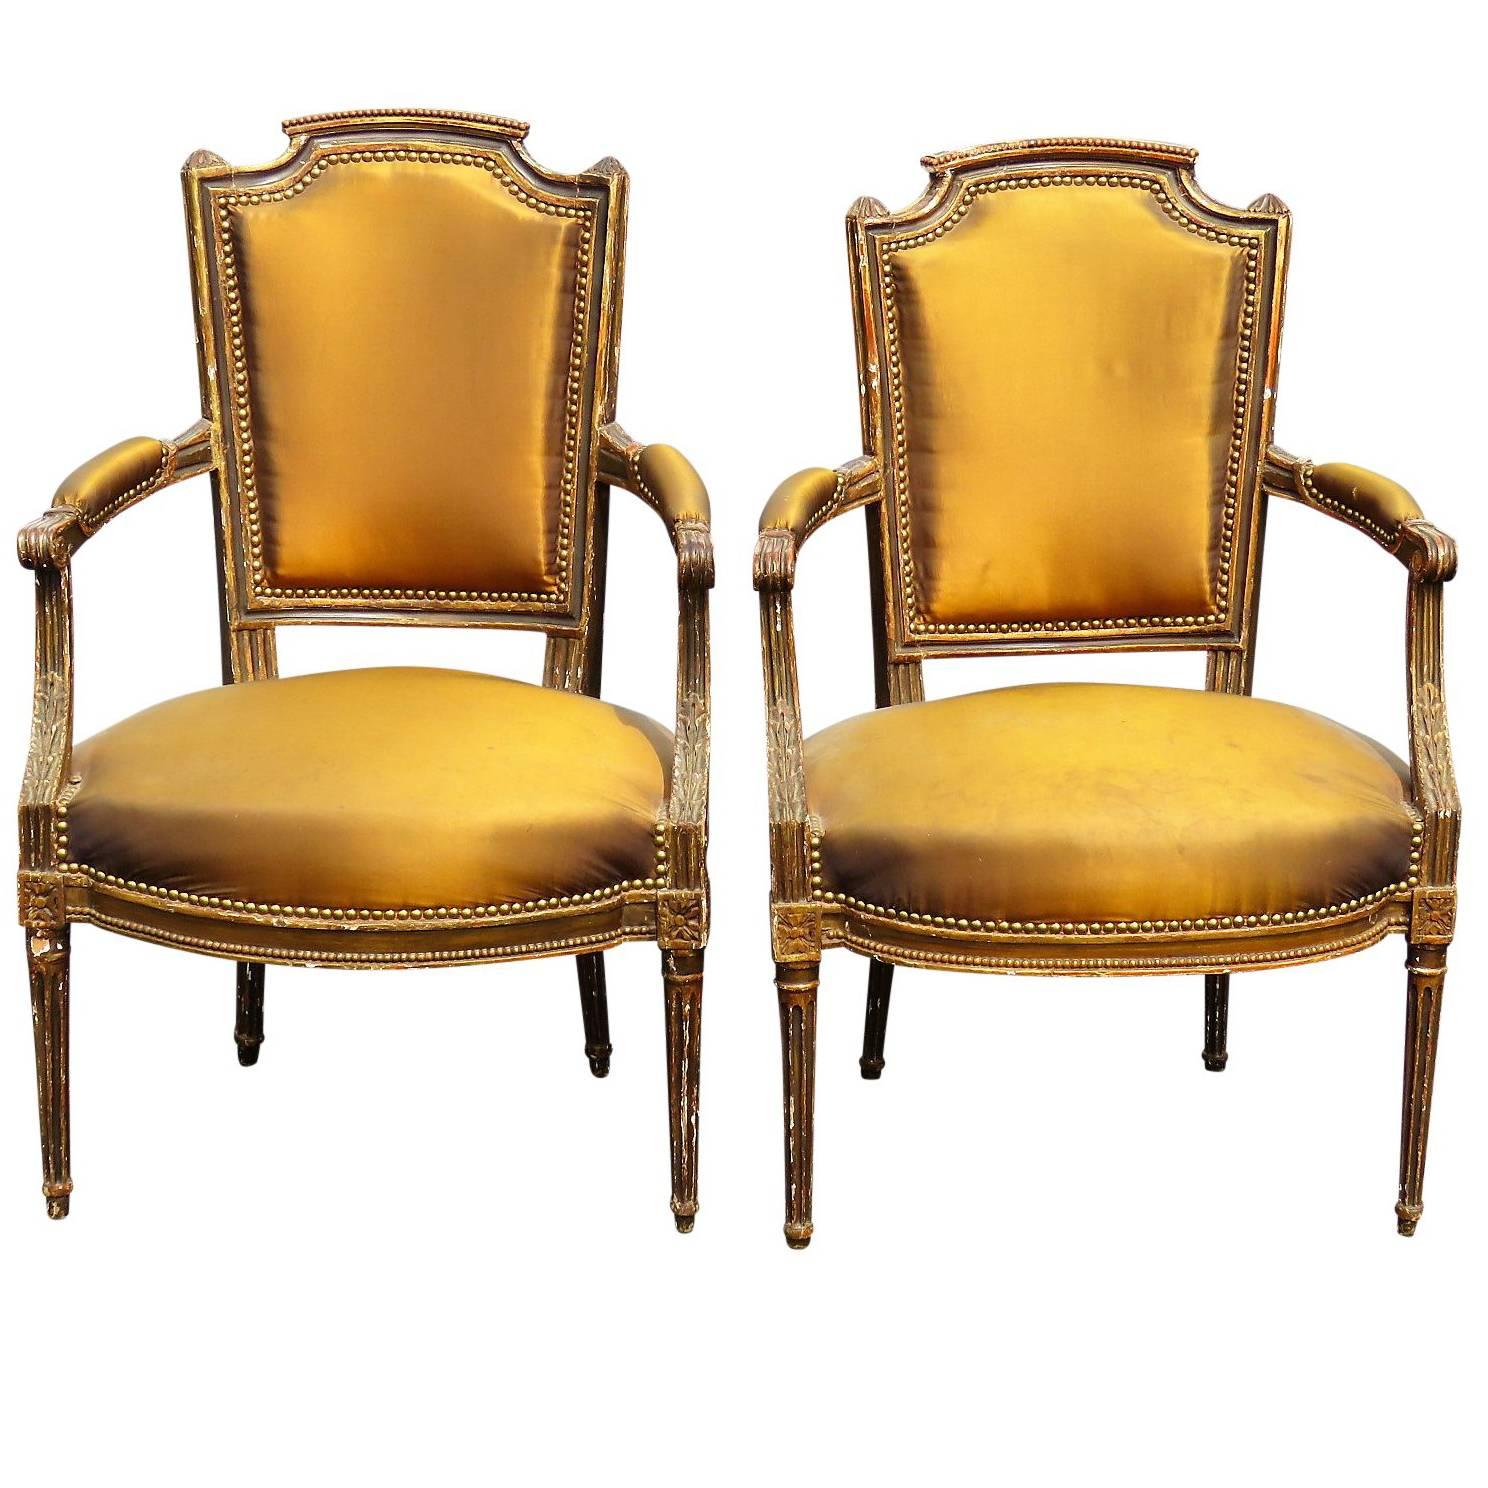 Pair of Louis XVI Style Distressed Painted Fauteuils